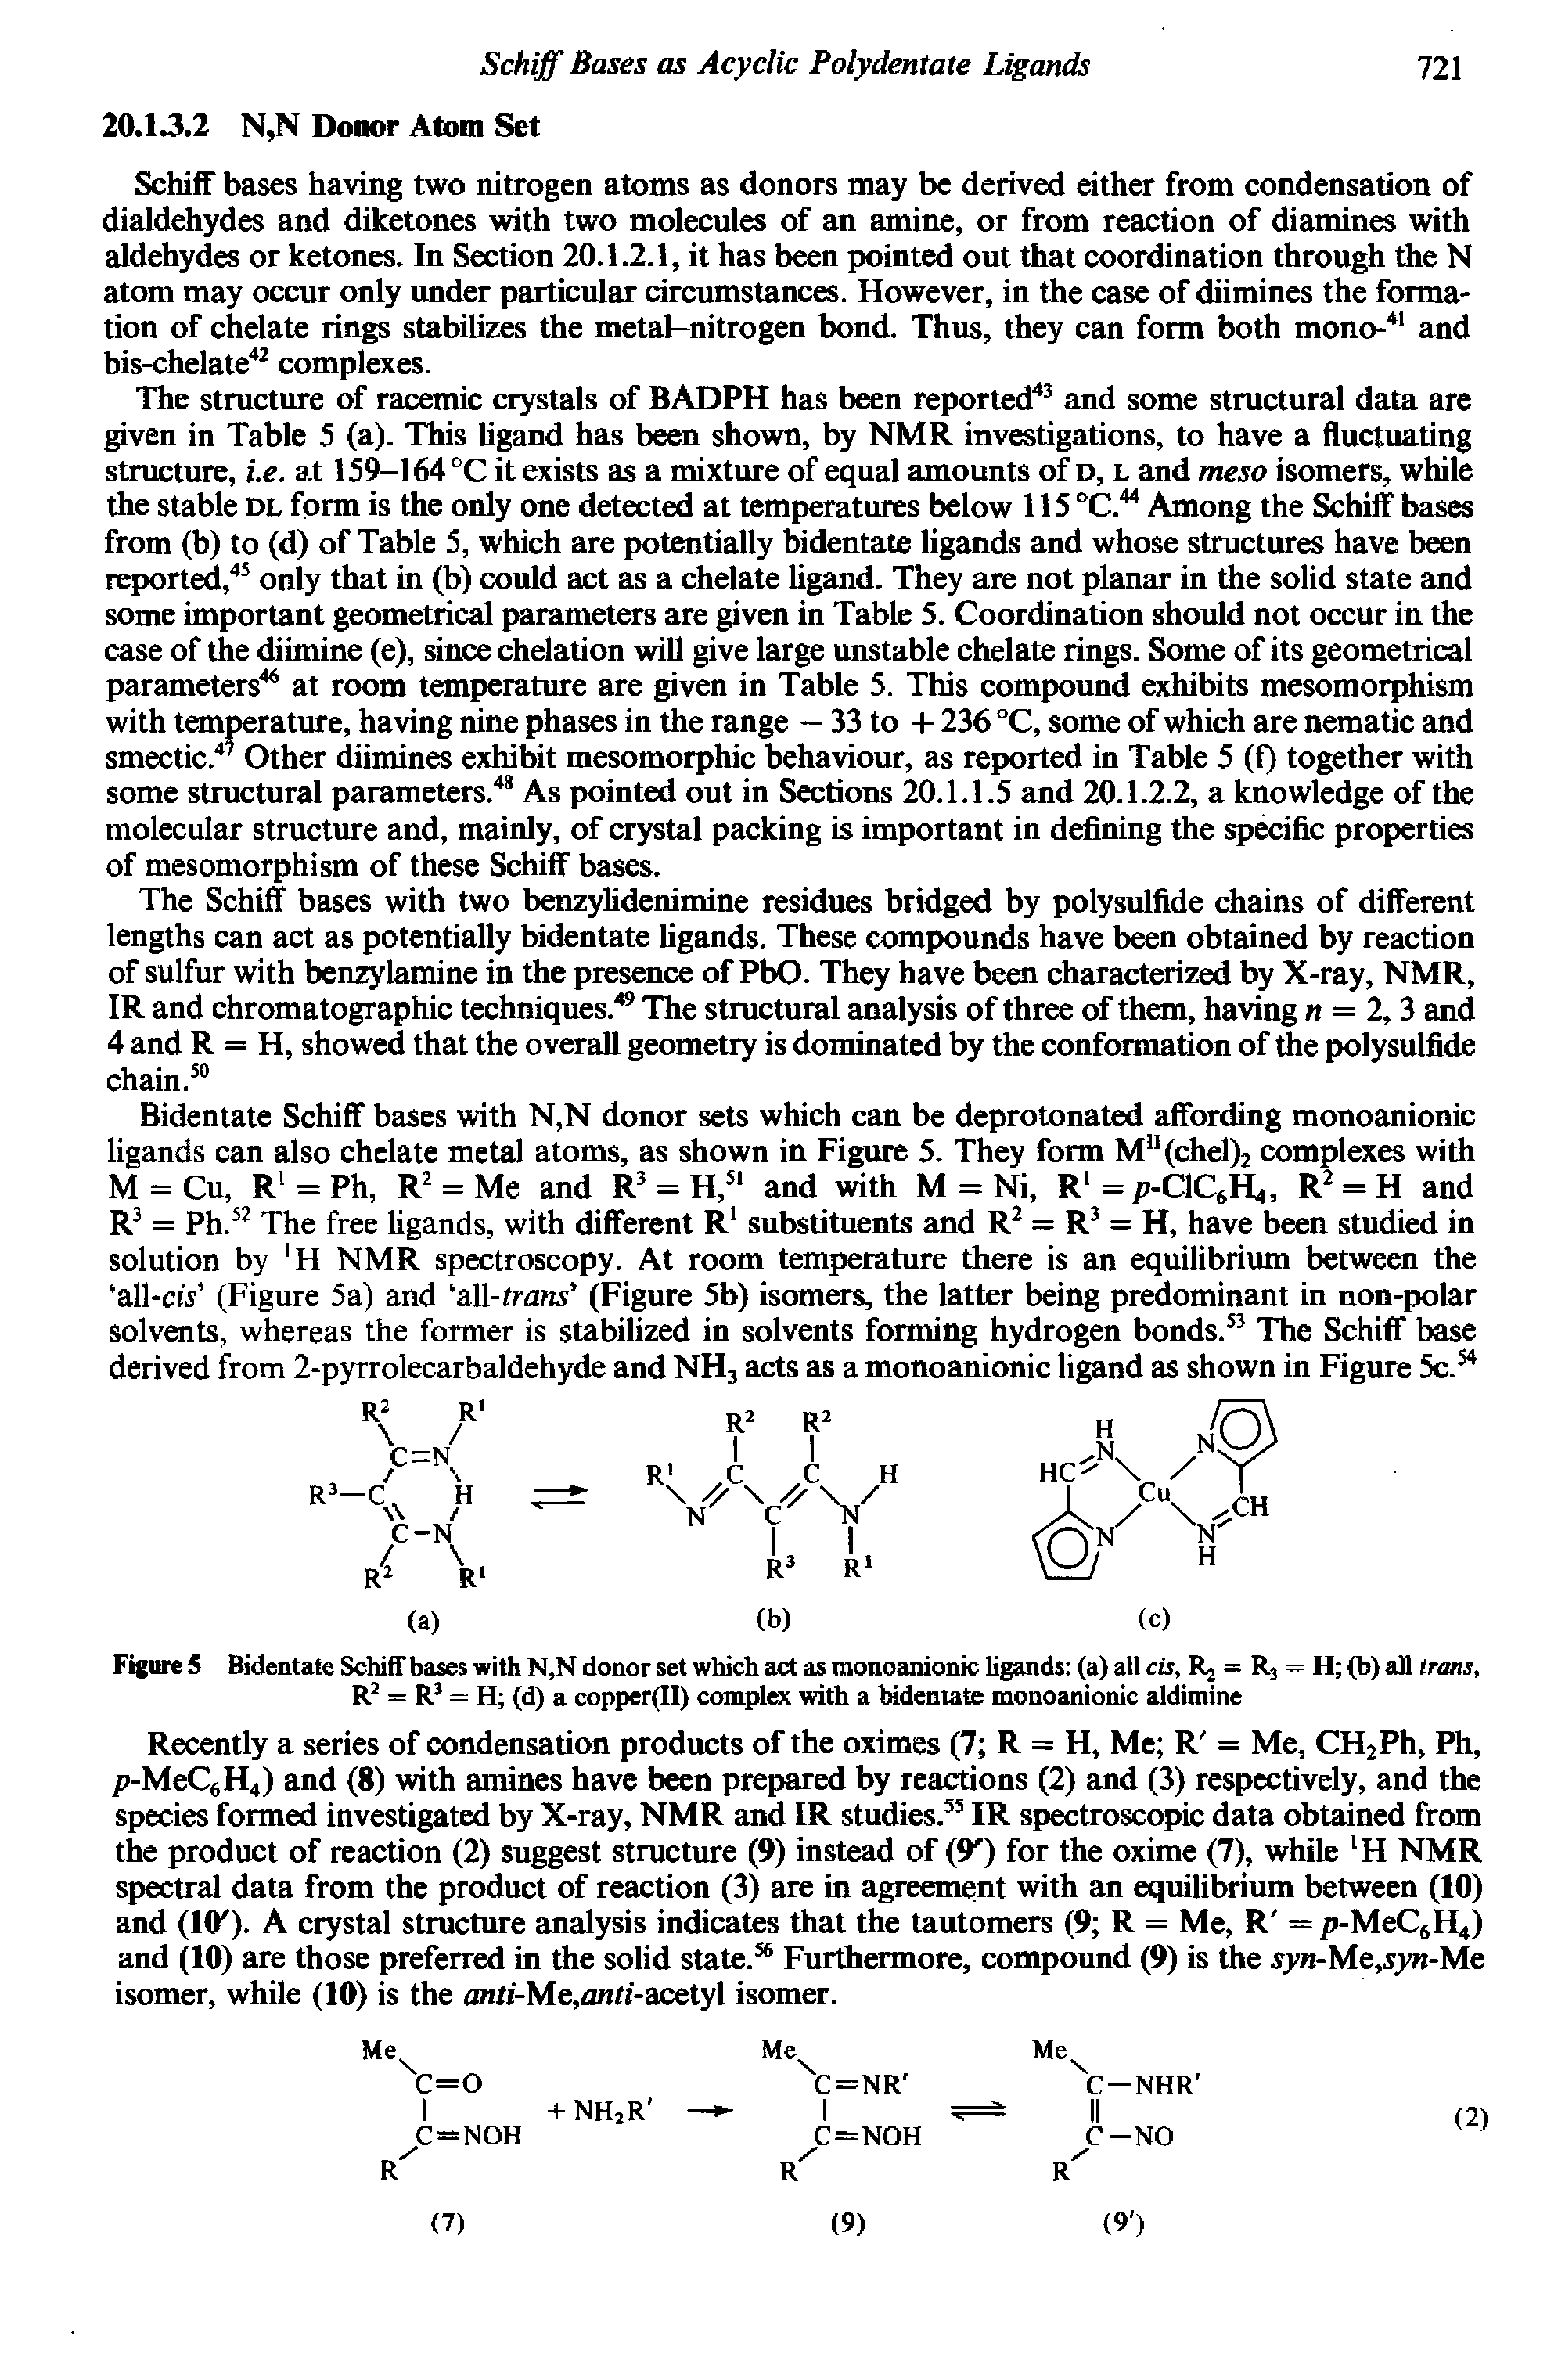 Figure 5 Bidentate Schiff bases with N,N donor set which act as monoanionic ligands (a) all cis, Rj = R3 = H (b) all trims, R2 = R = H (d) a copper(II) complex with a bidentate monoanionic aldimine...